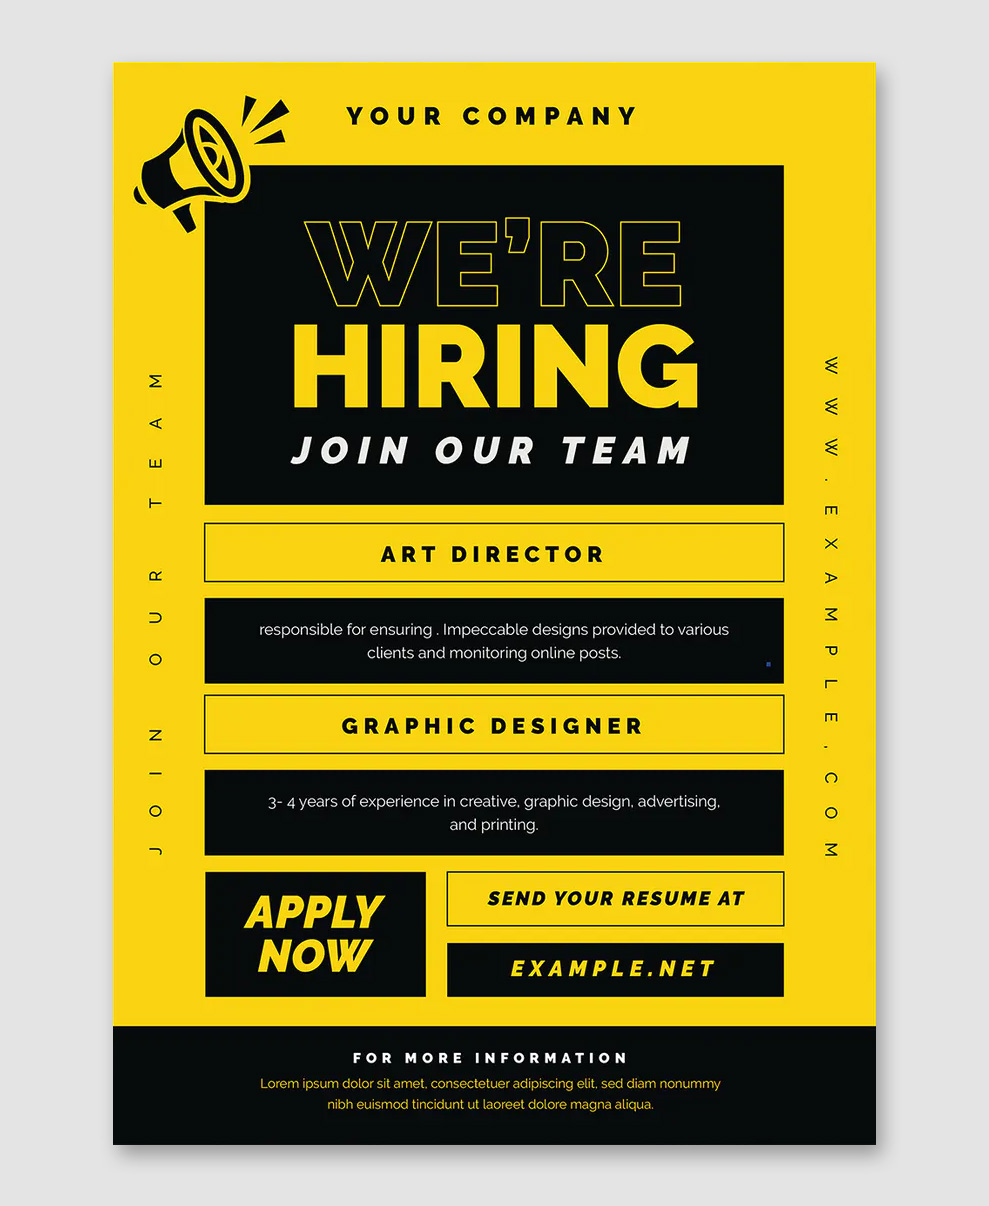 We Are Hiring Flyer